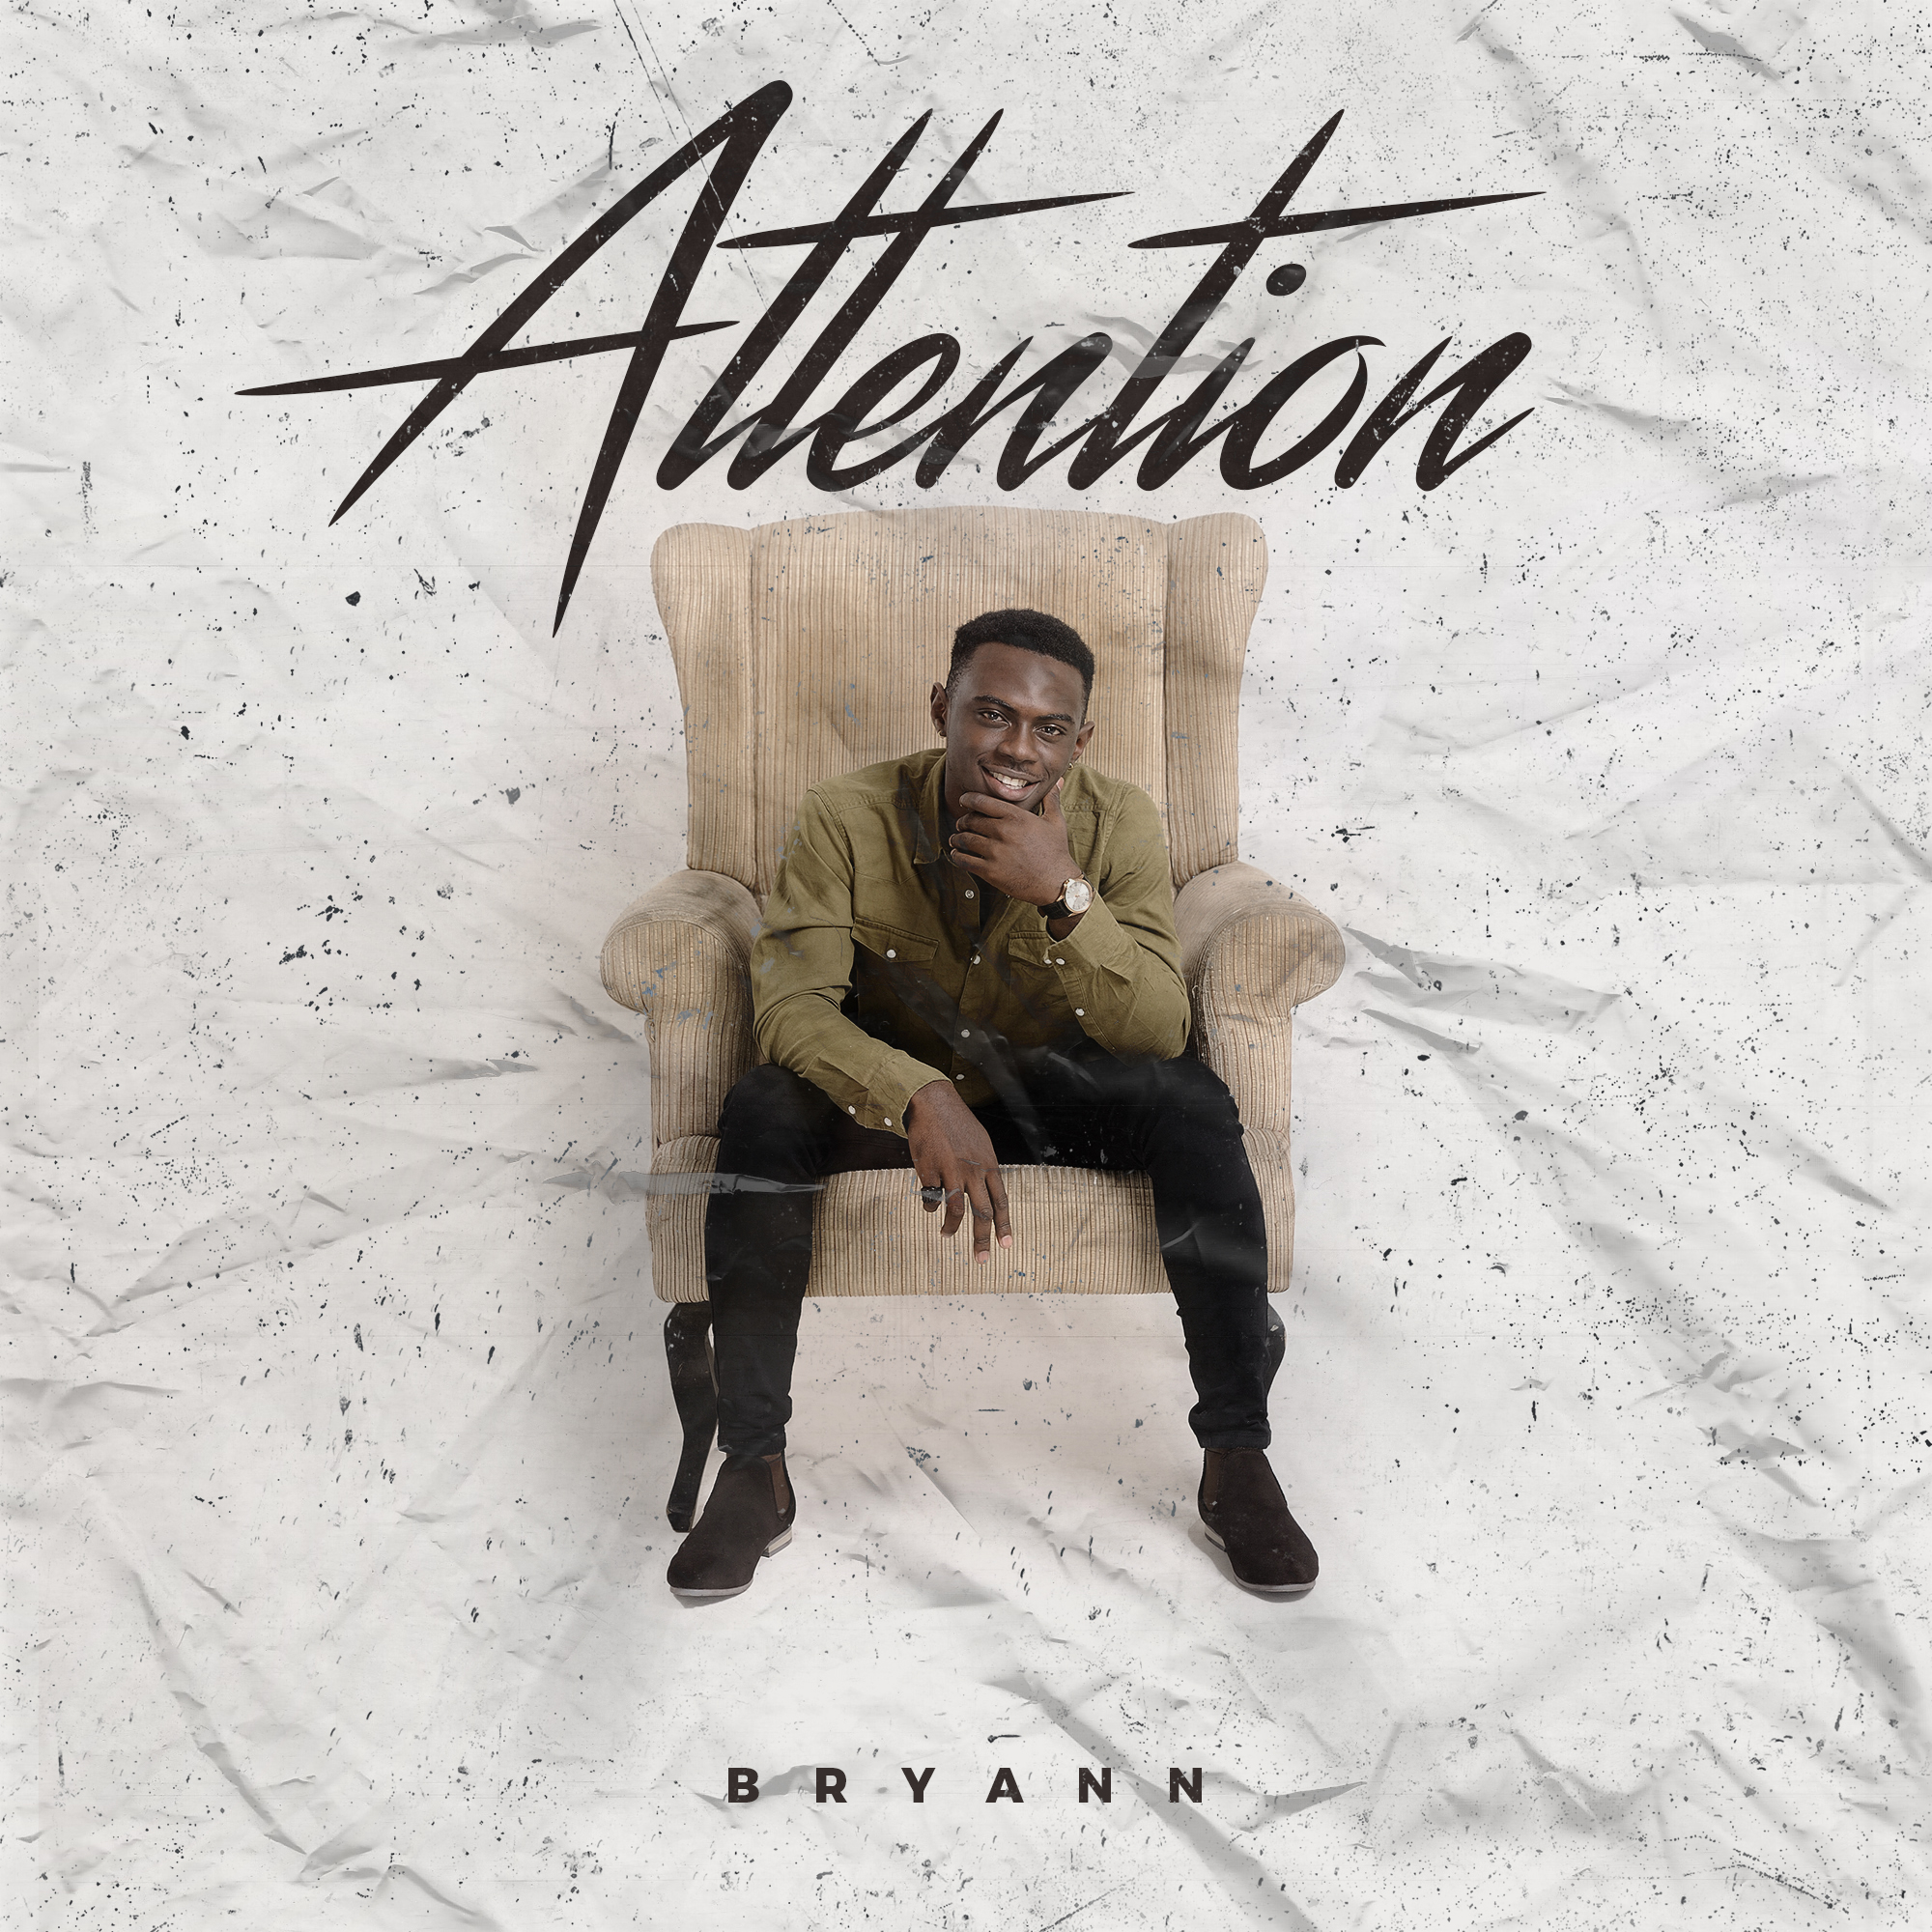 BRYANN – ATTENTION (Audio & Video) -FOR IMMEDIATE POST